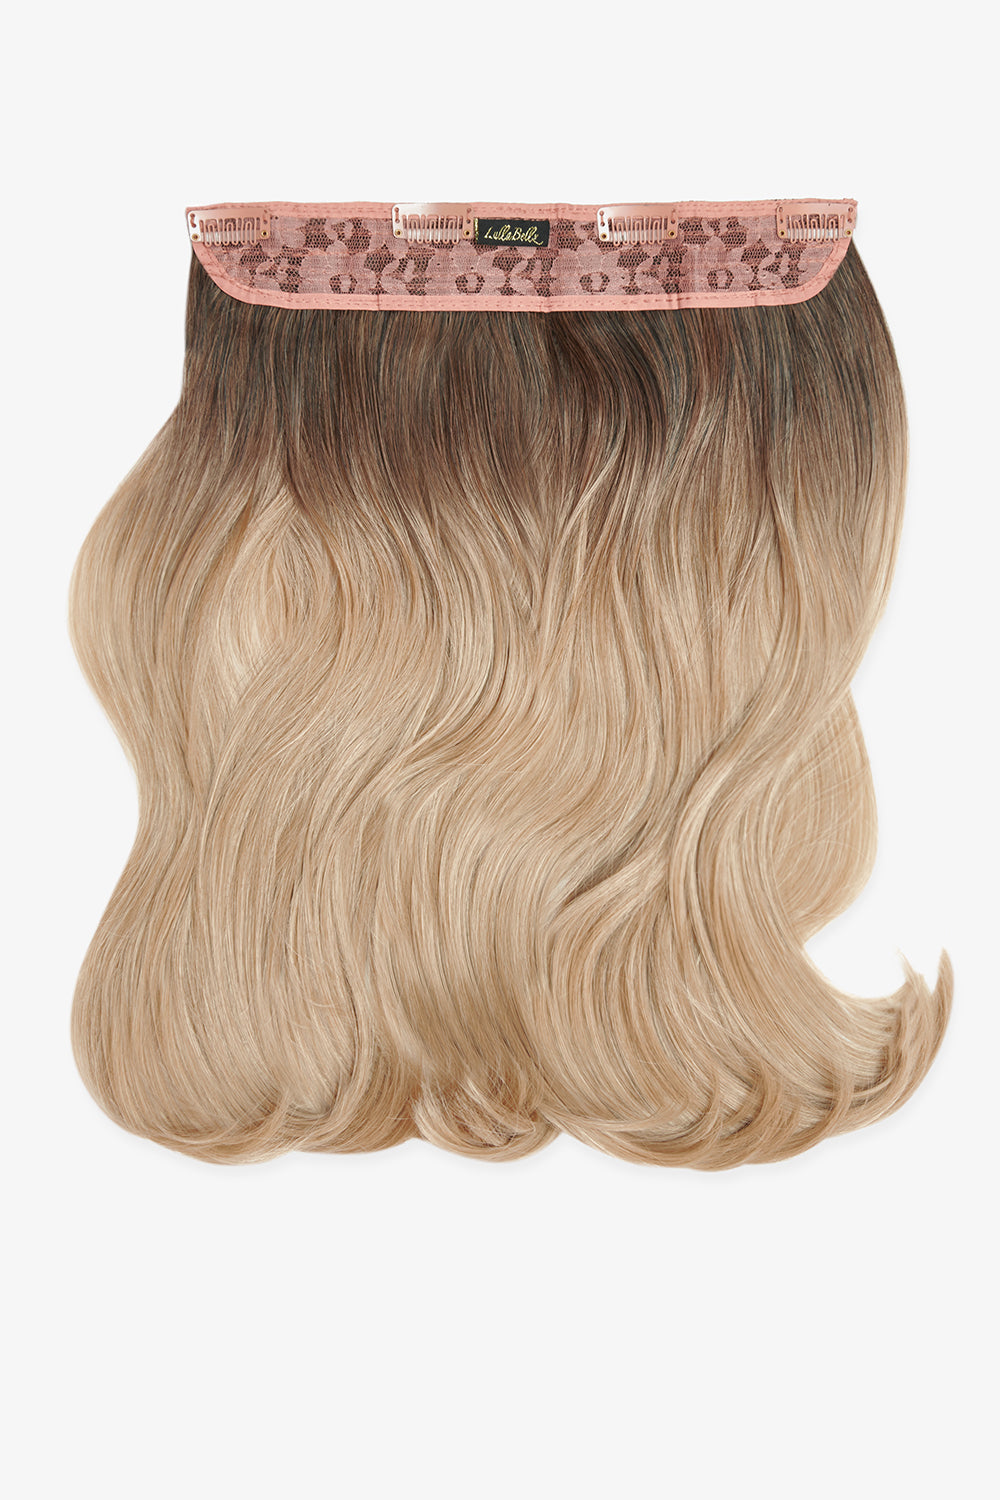 Iced latte 14 clip in hair extensions 120g